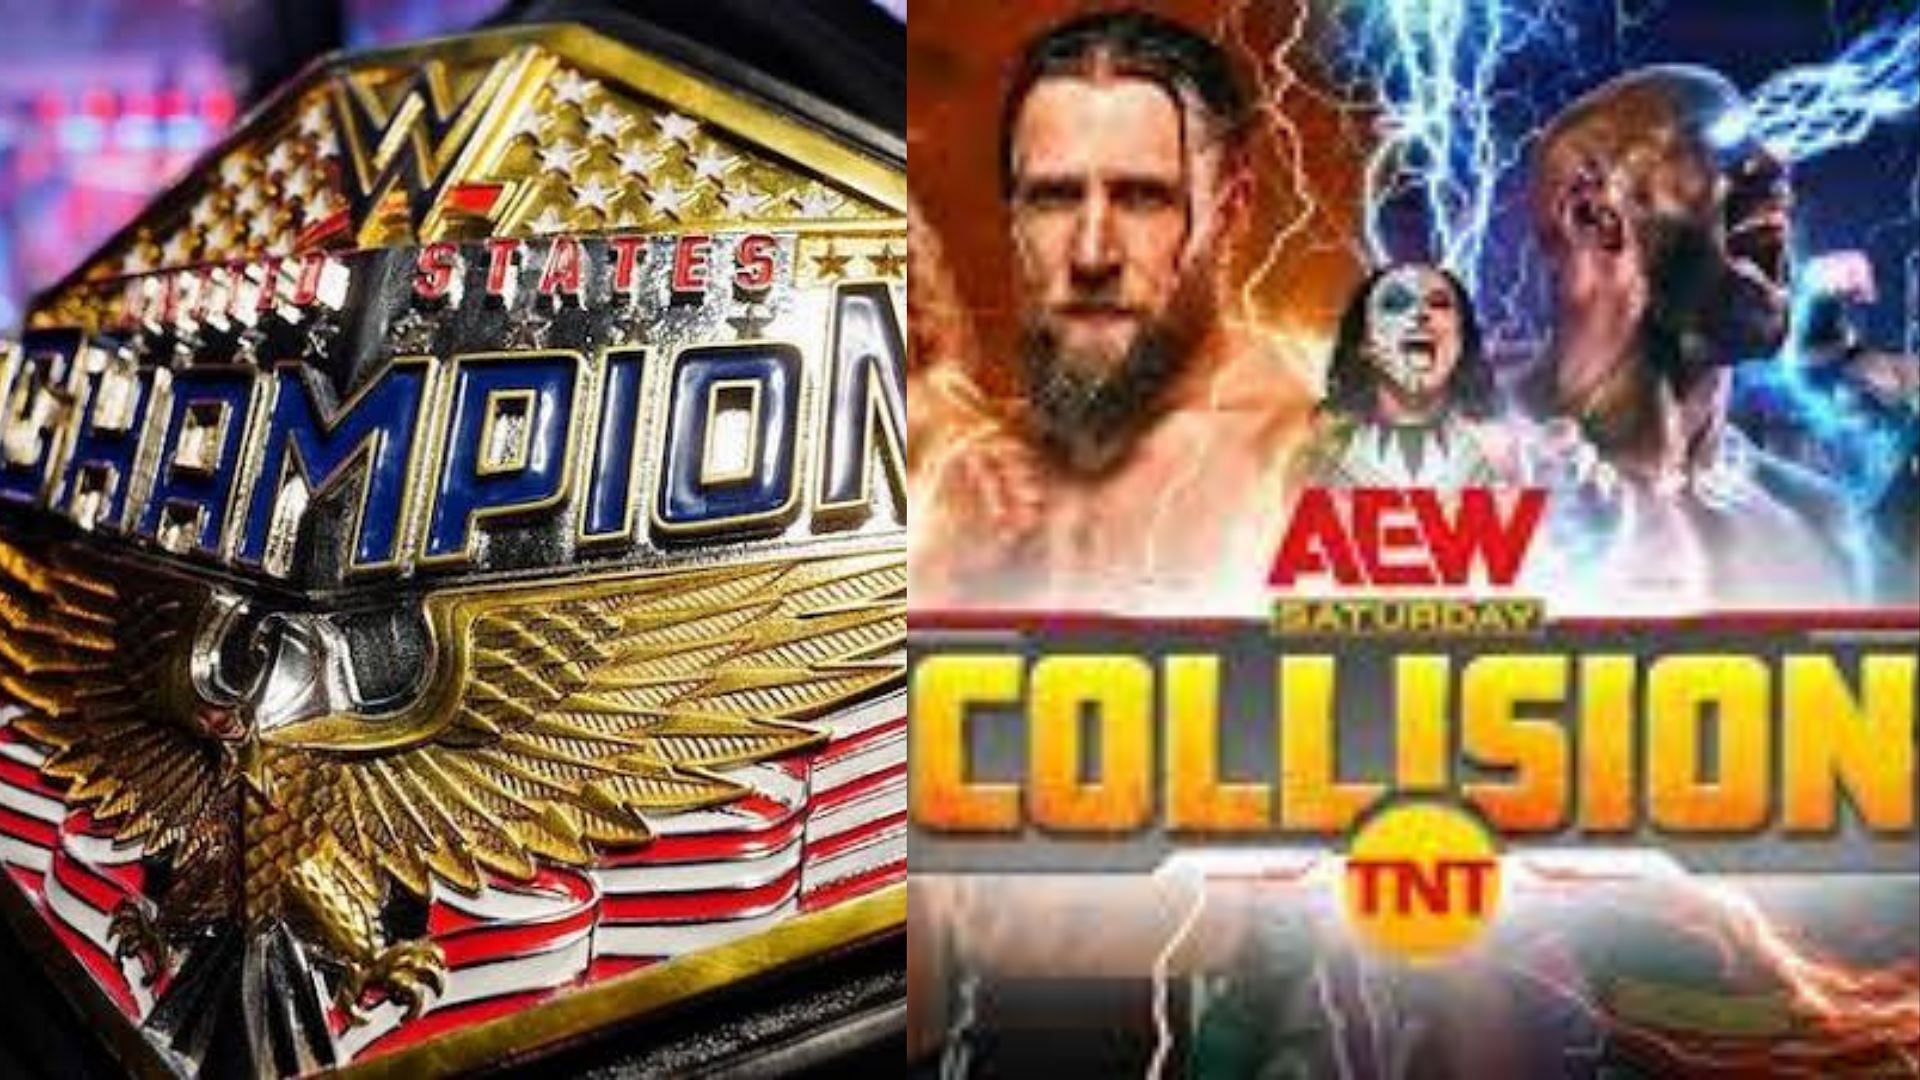 AEW Collision is set to premiere on June 17th.